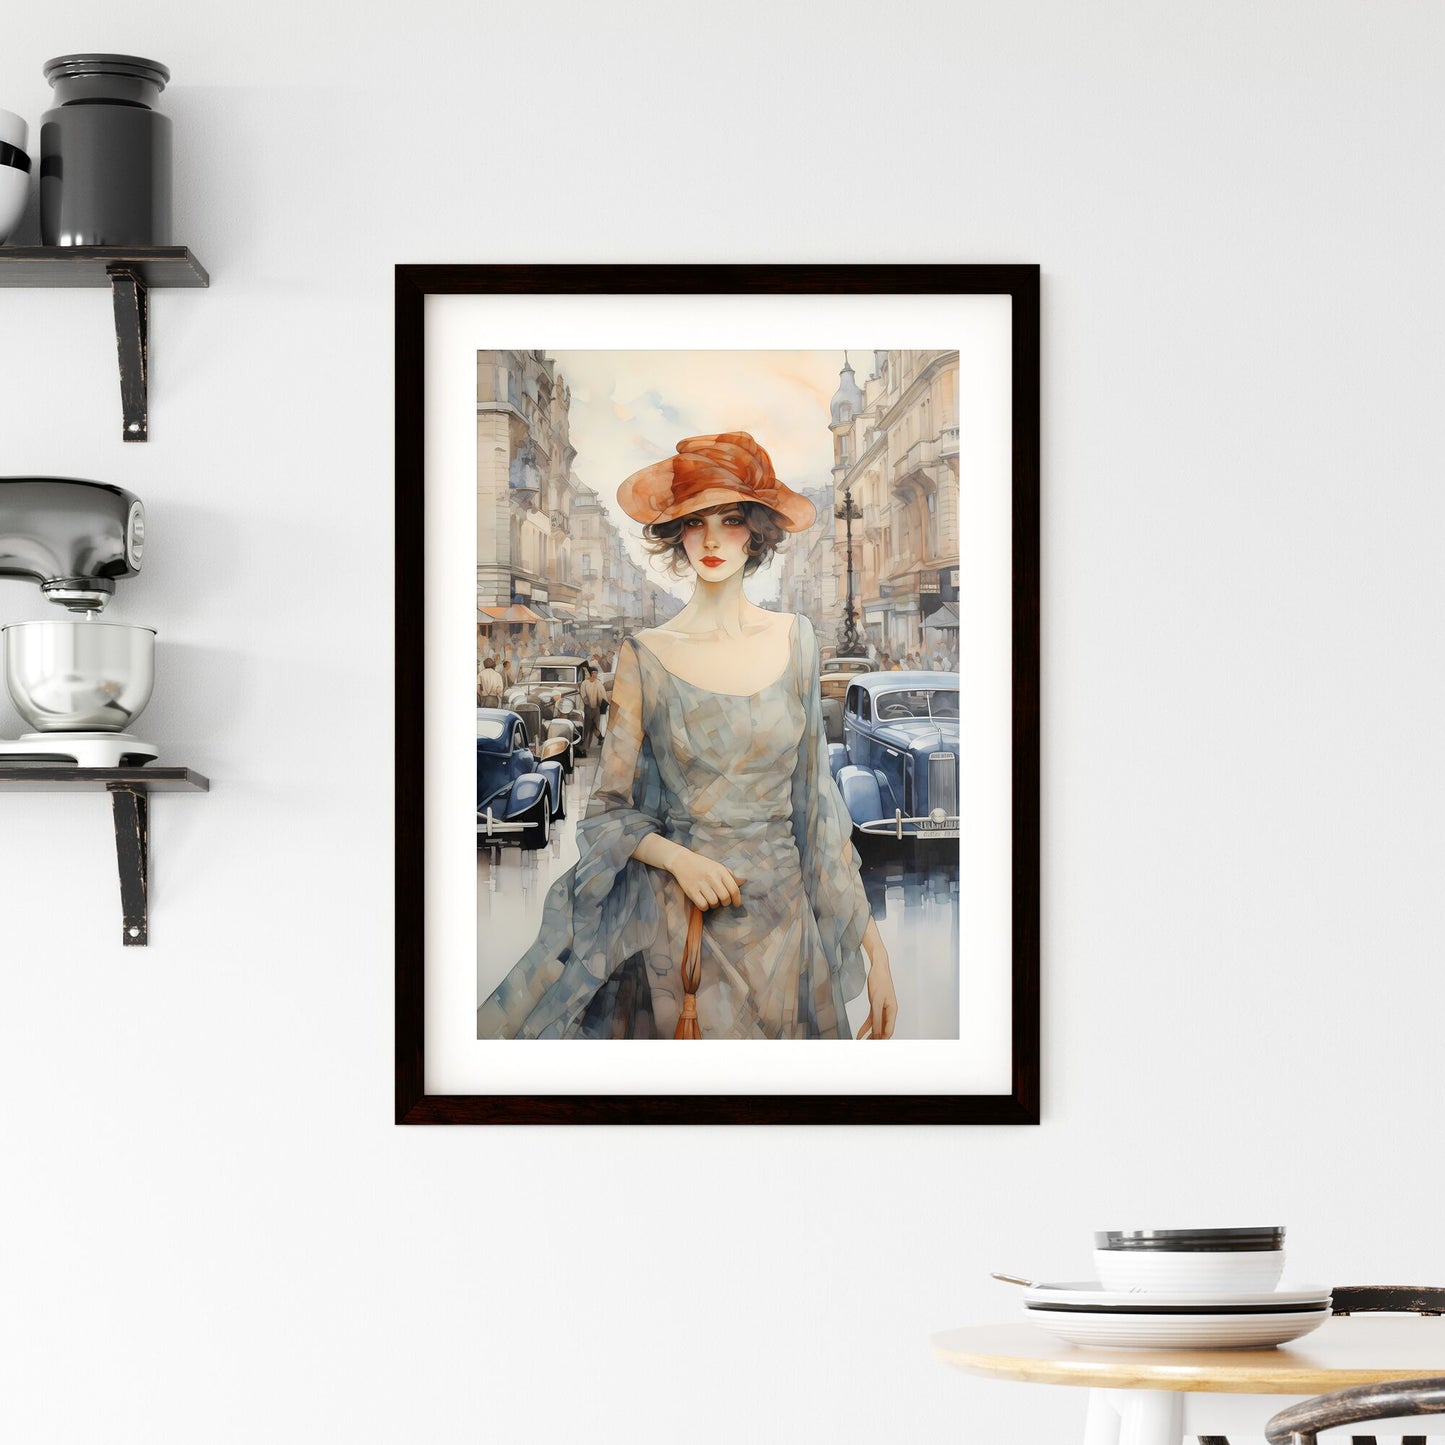 A Poster of art deco noveaux - A Woman In A Dress And Hat Default Title